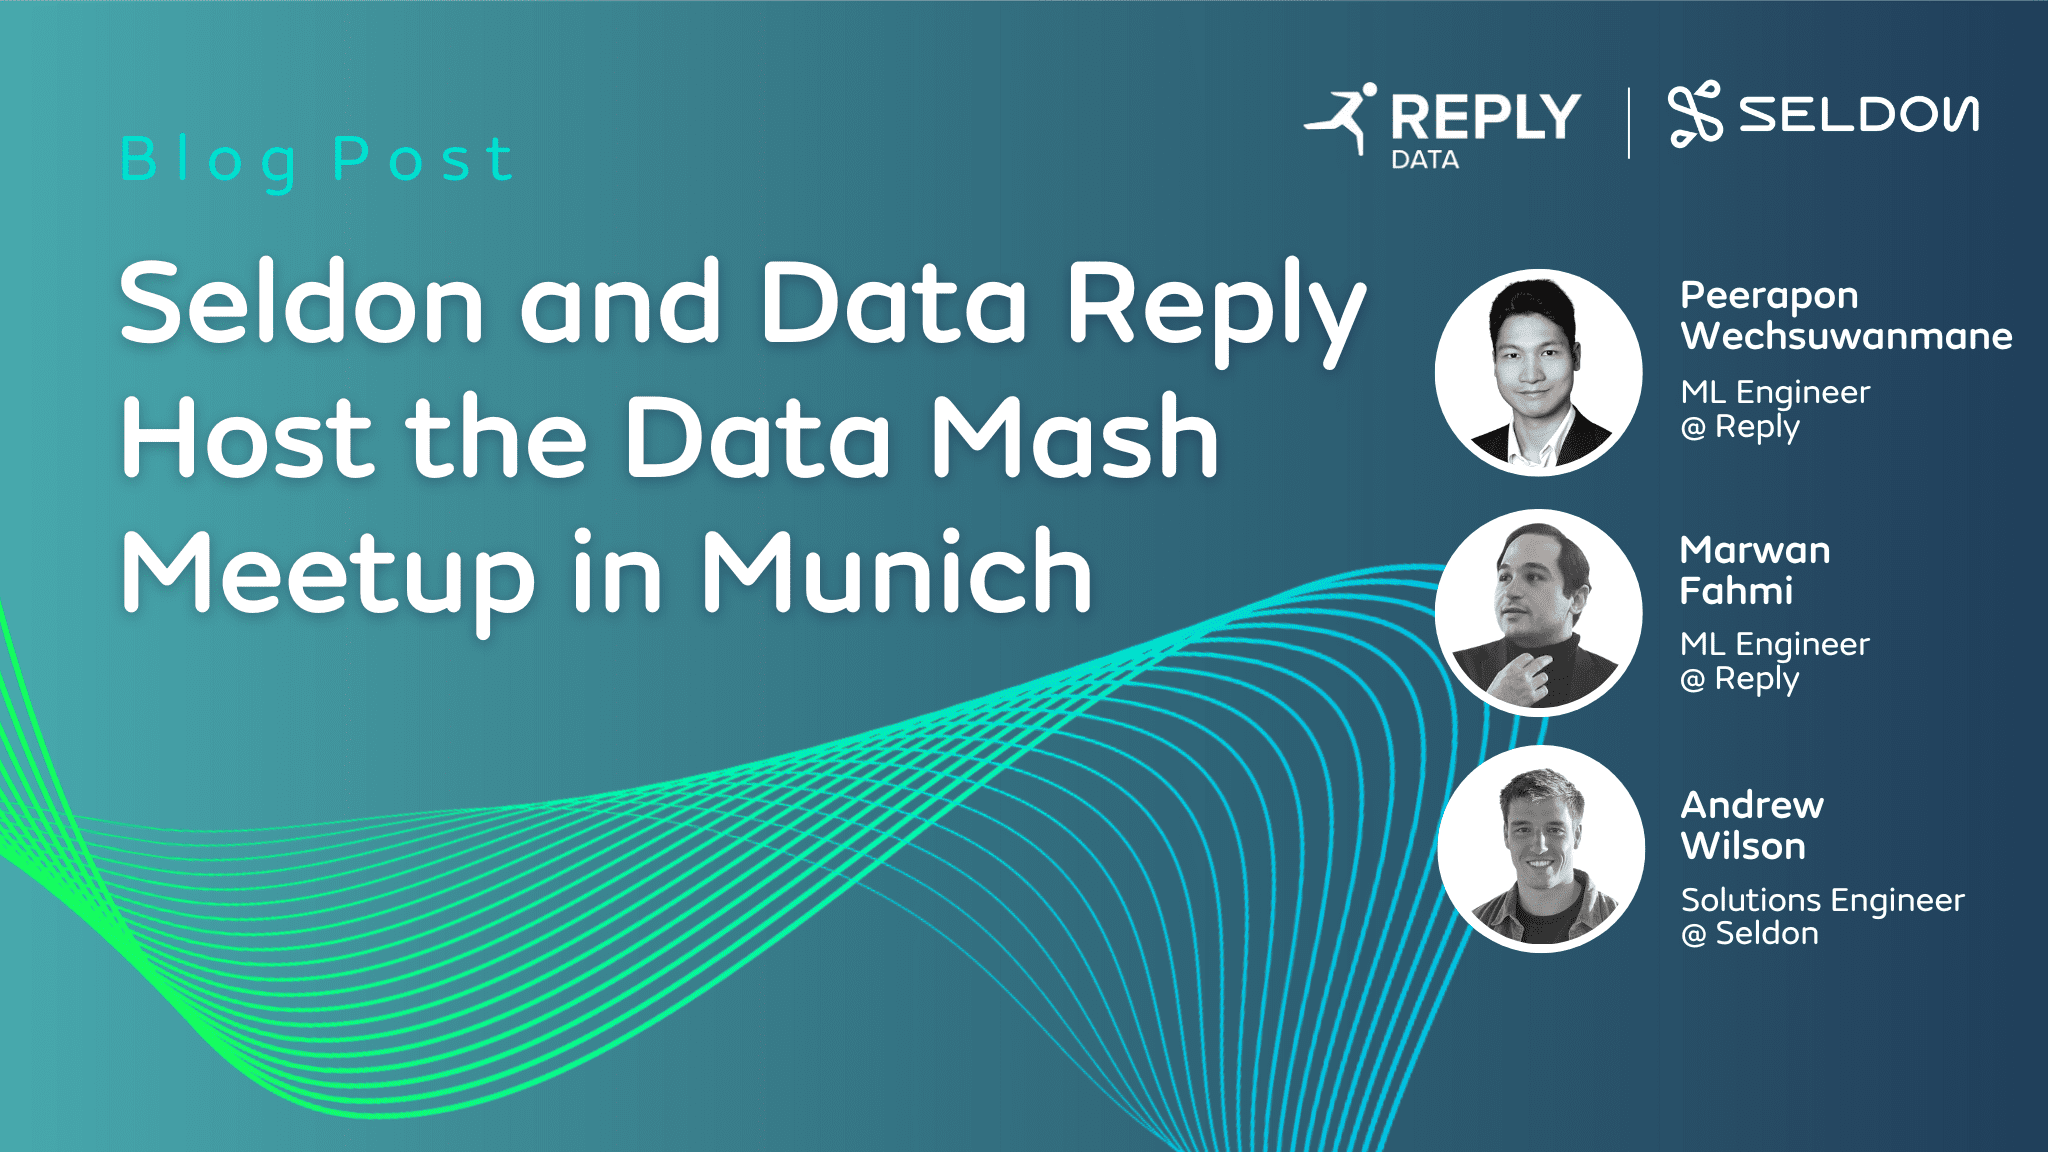 Seldon and Data Reply host the Data Mash Meetup in Munich